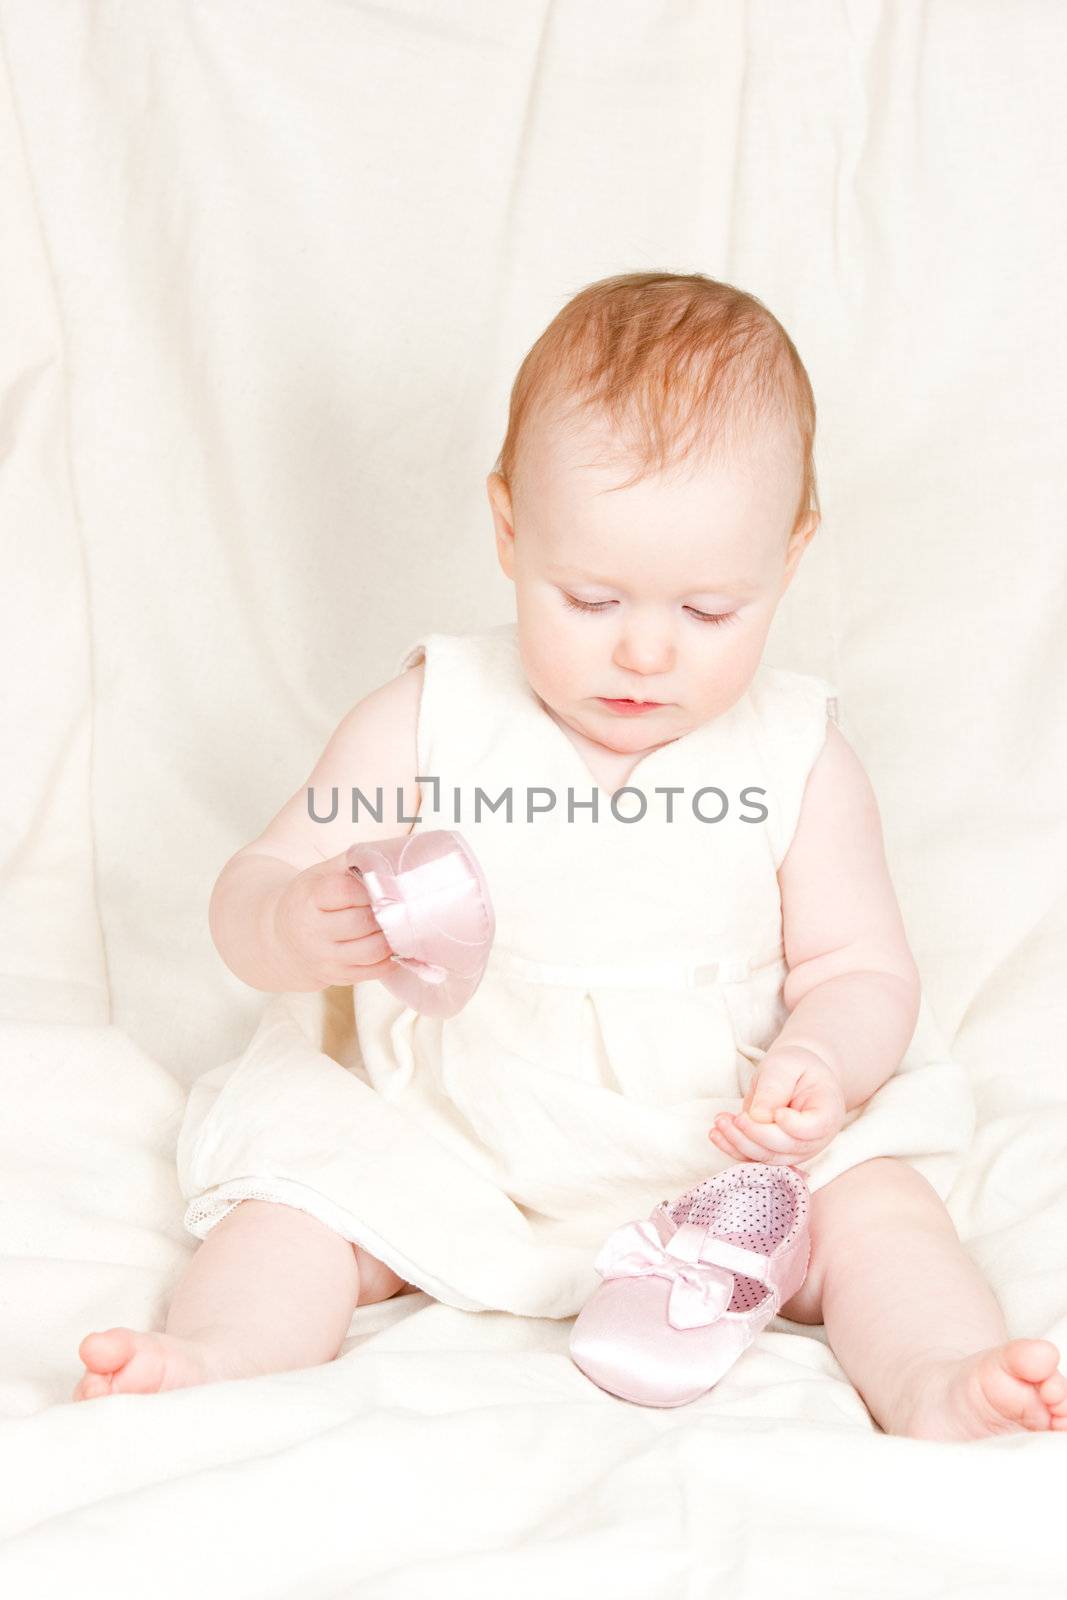 Infant with shoes by naumoid